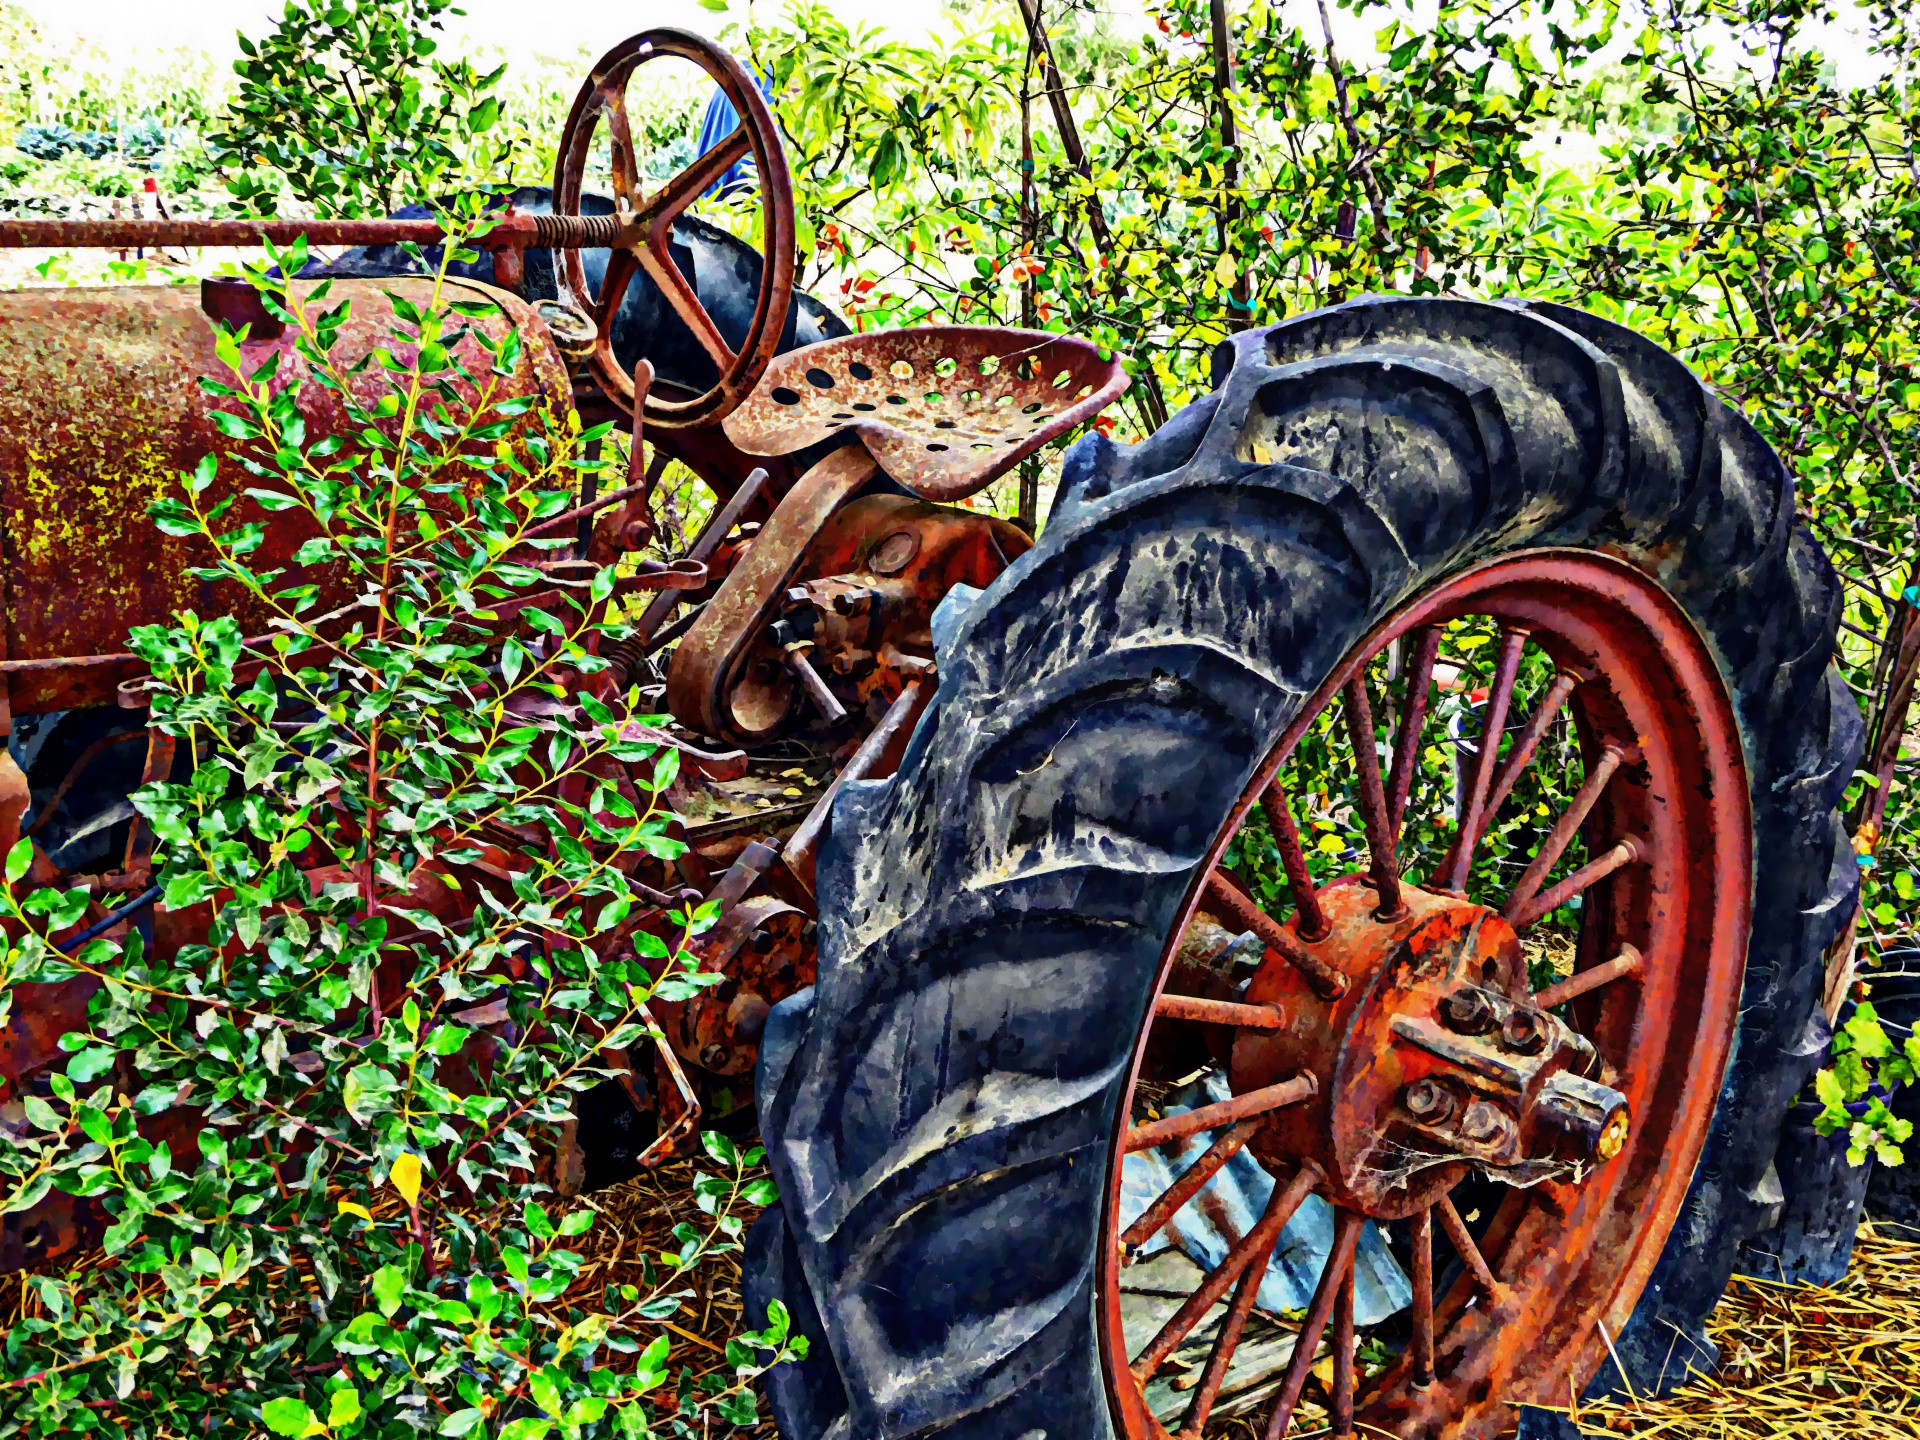 tractor tractors old free photo